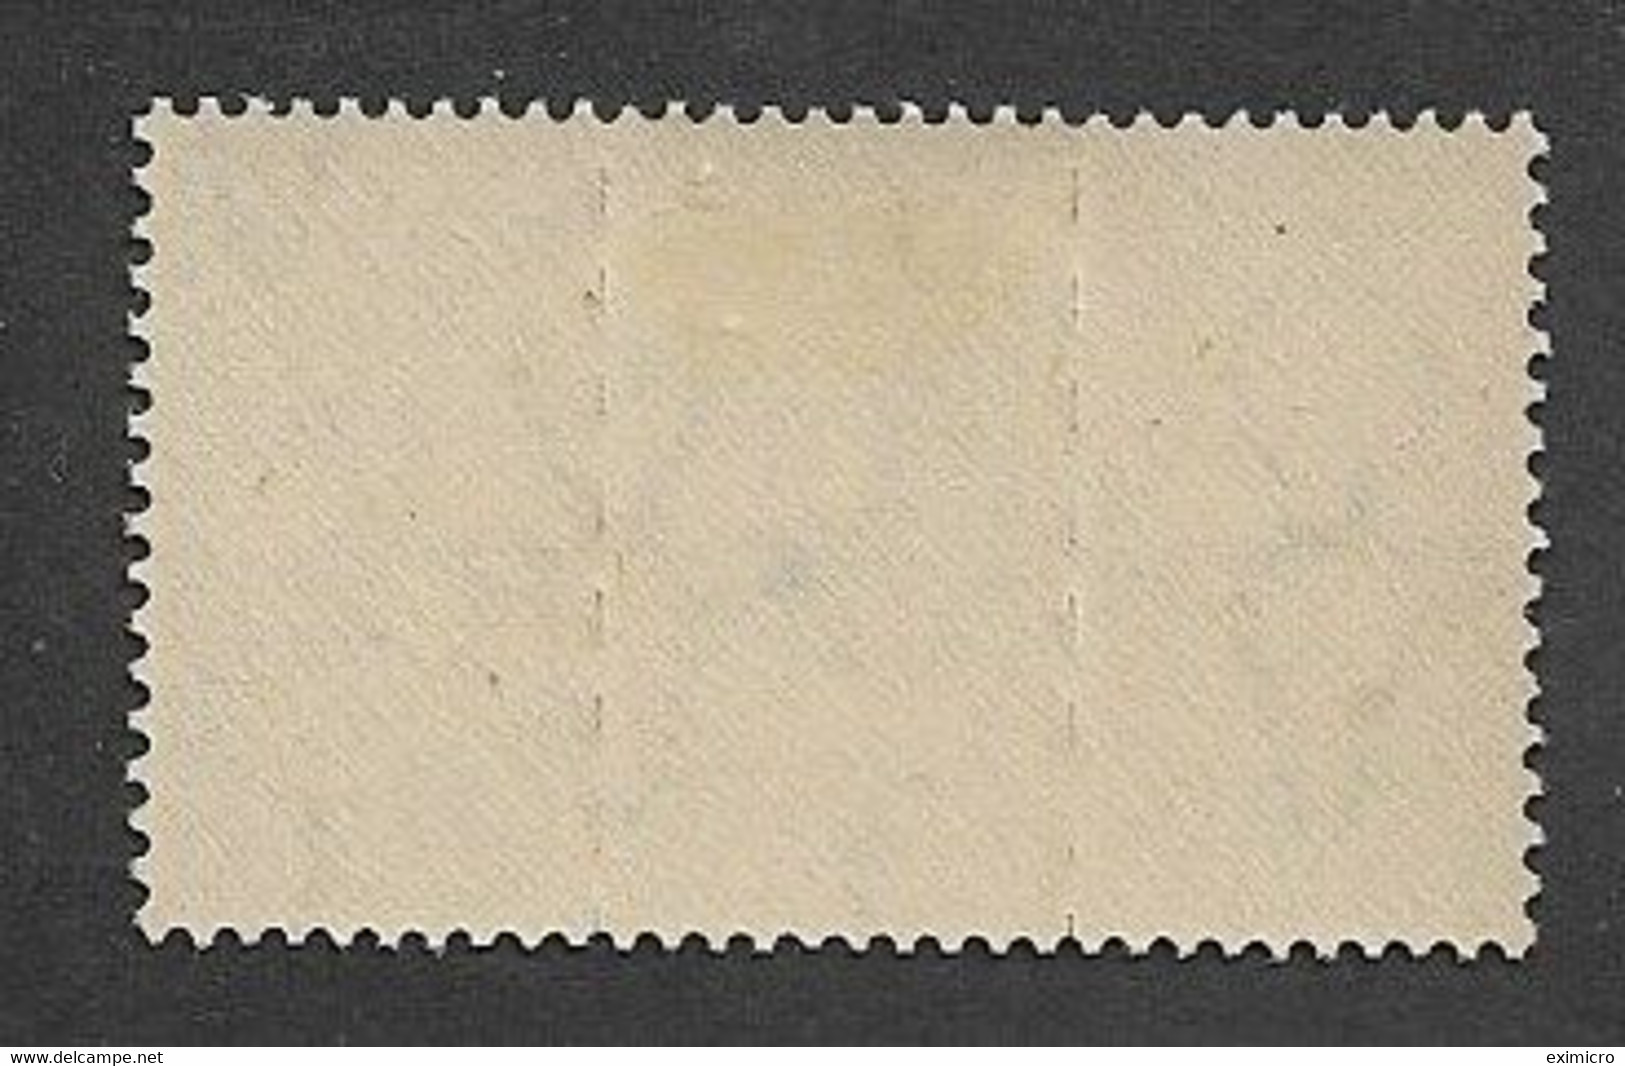 SOUTH AFRICA 1944 ½d POSTAGE DUE UNIT OF 3 SG D30 UNMOUNTED/MOUNTED MINT Cat £13 - Impuestos